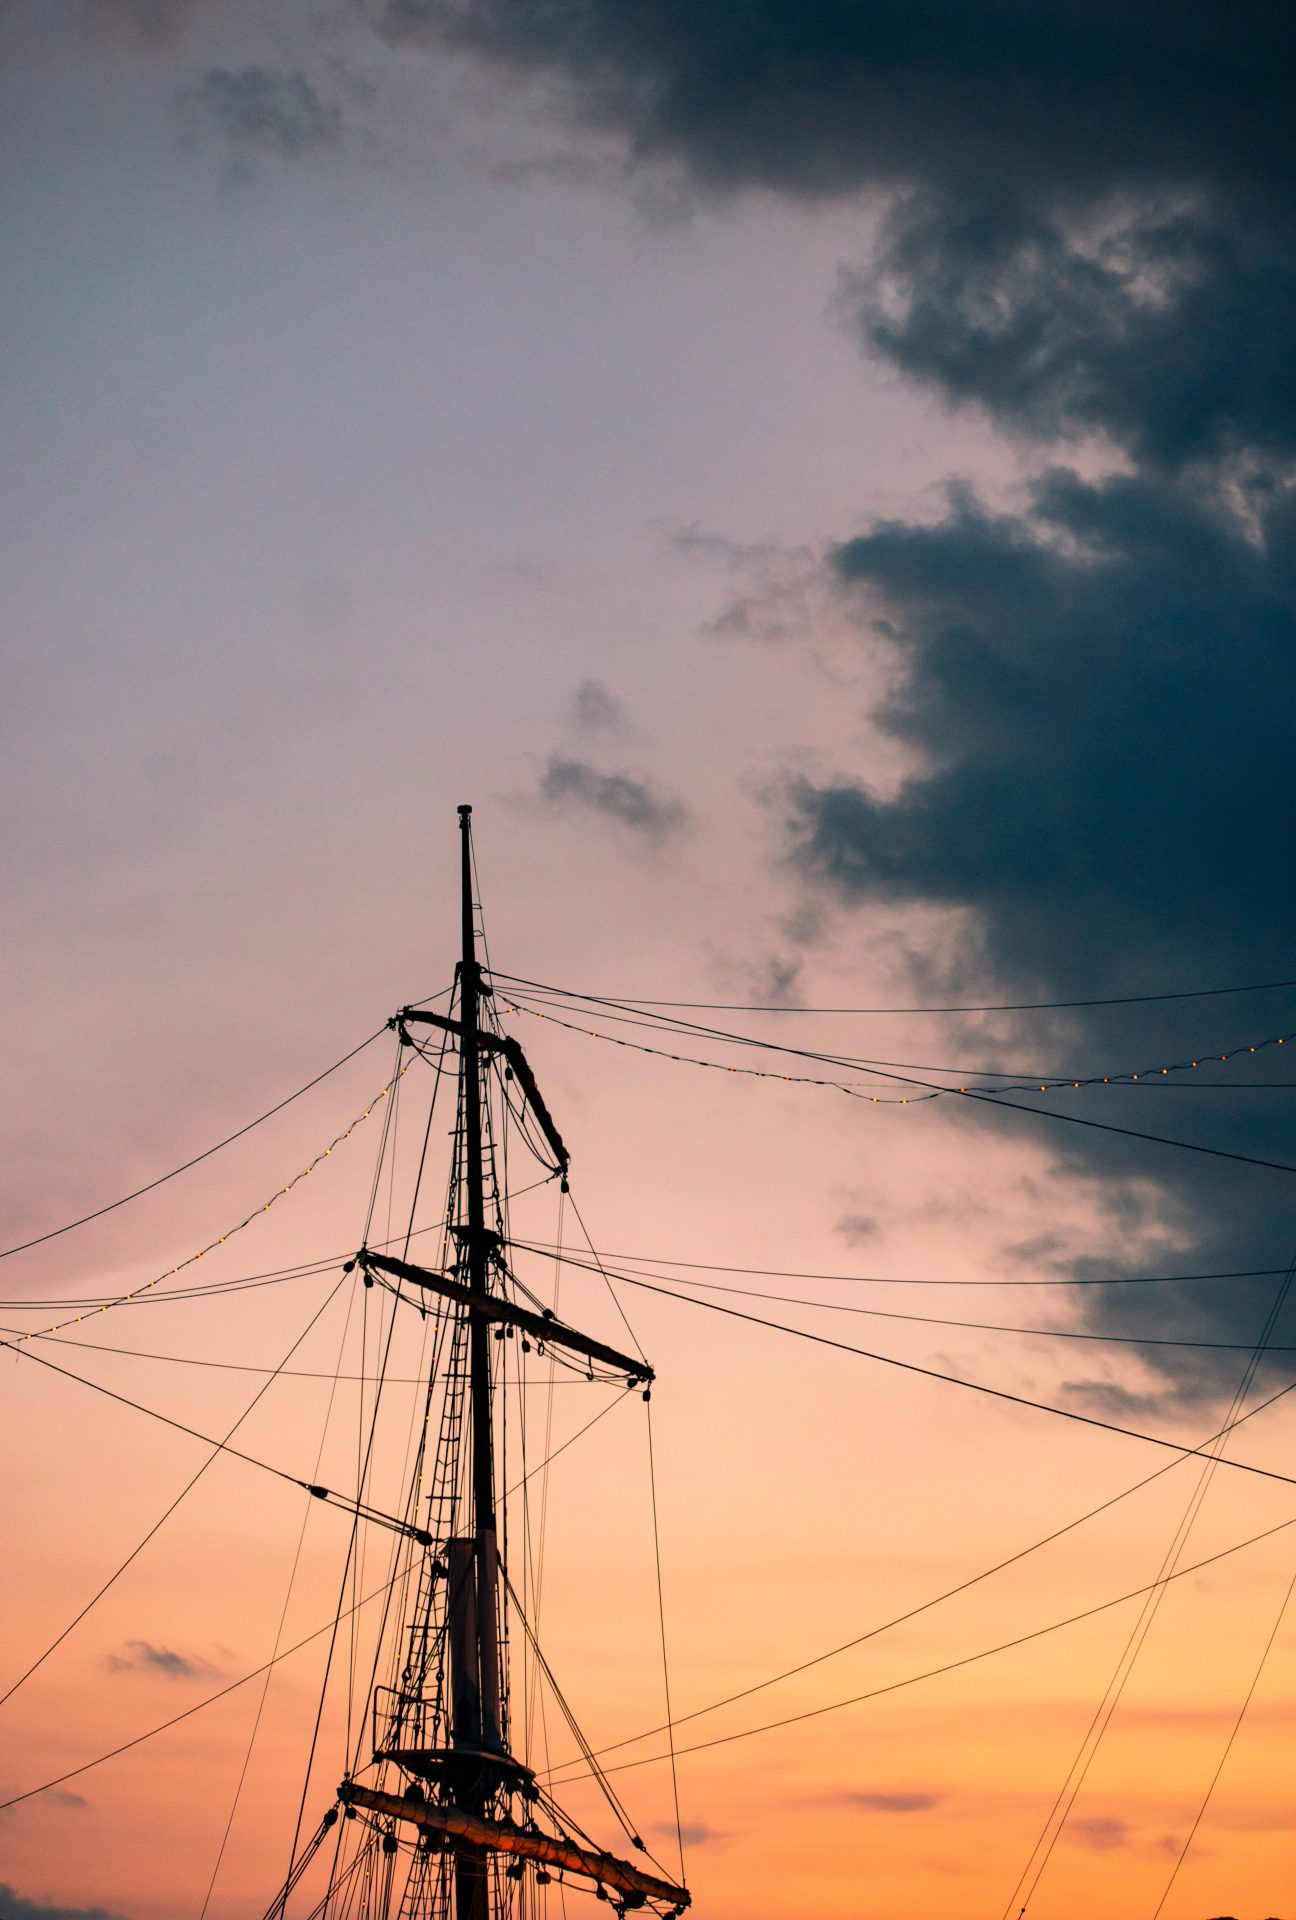 Top of old sailing boats in the sunset under stormy clouds